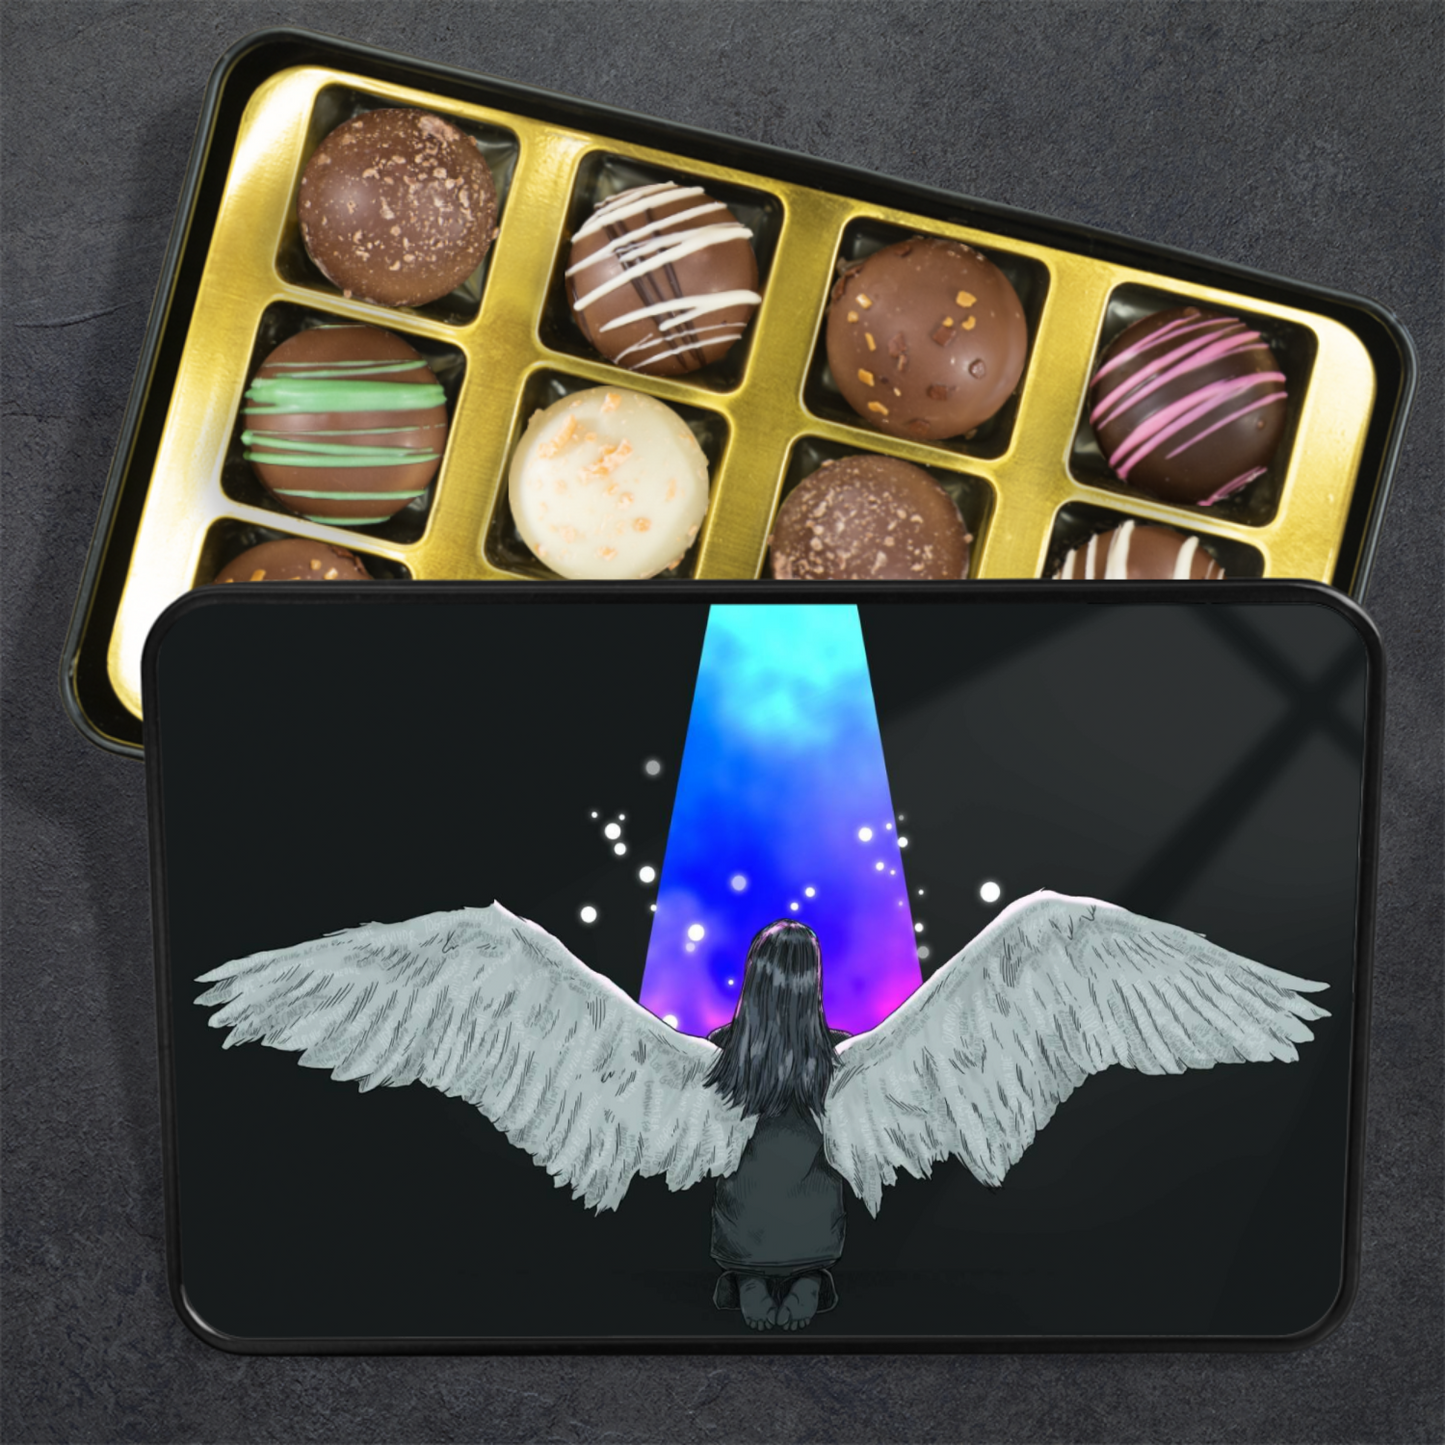 Handmade Chocolate Truffles with "Find Your Light" Tin